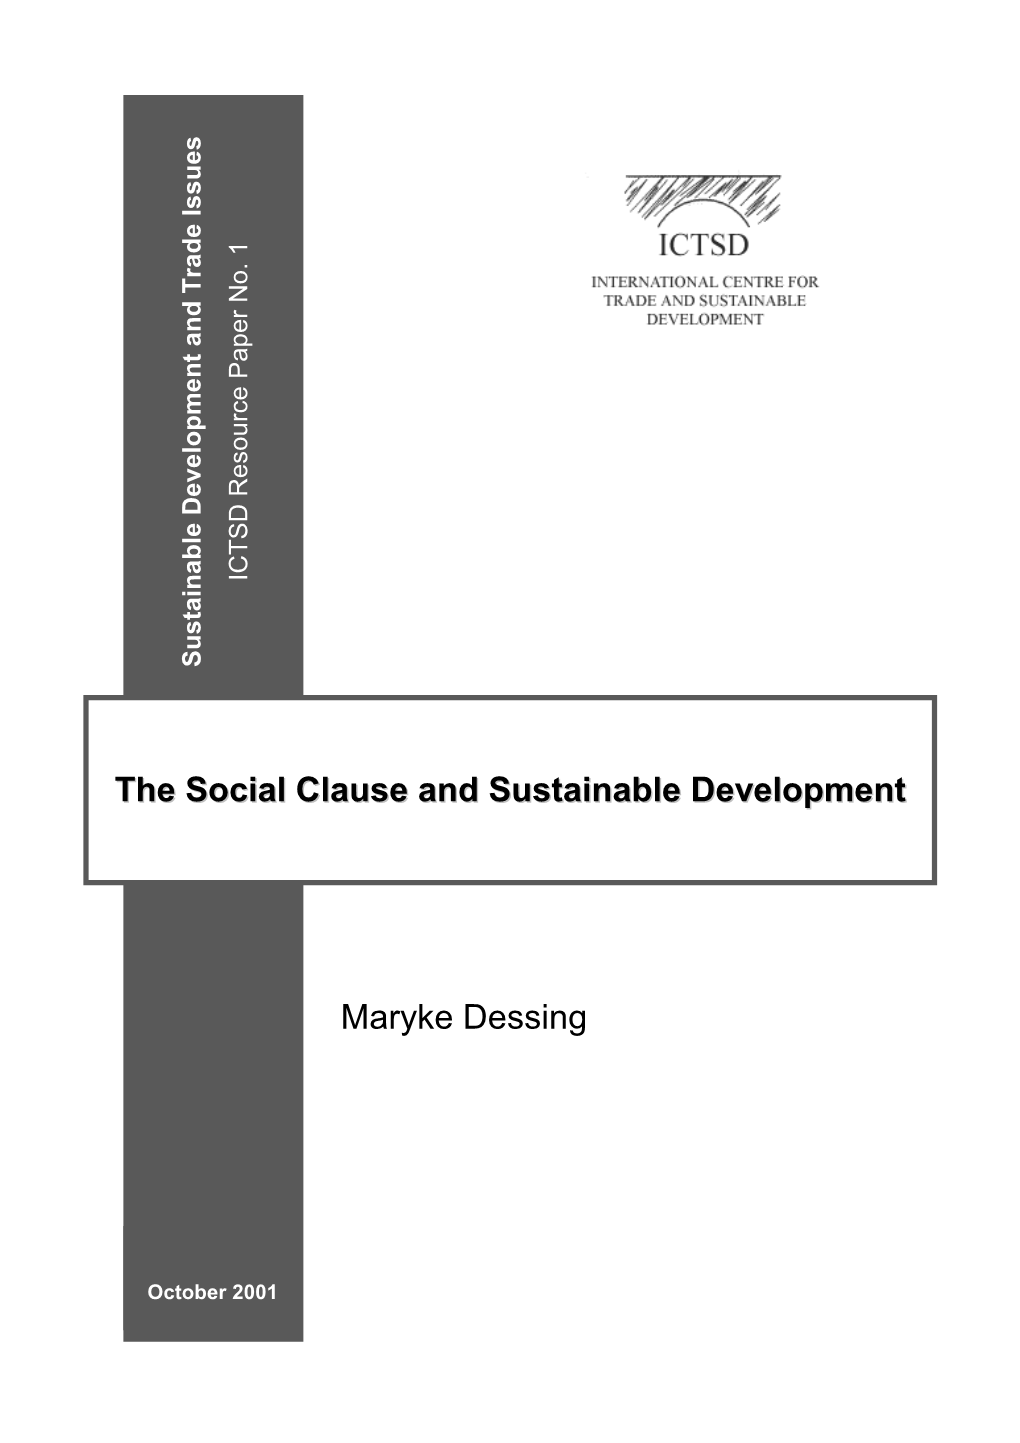 Maryke Dessing the Social Clause and Sustainable Development